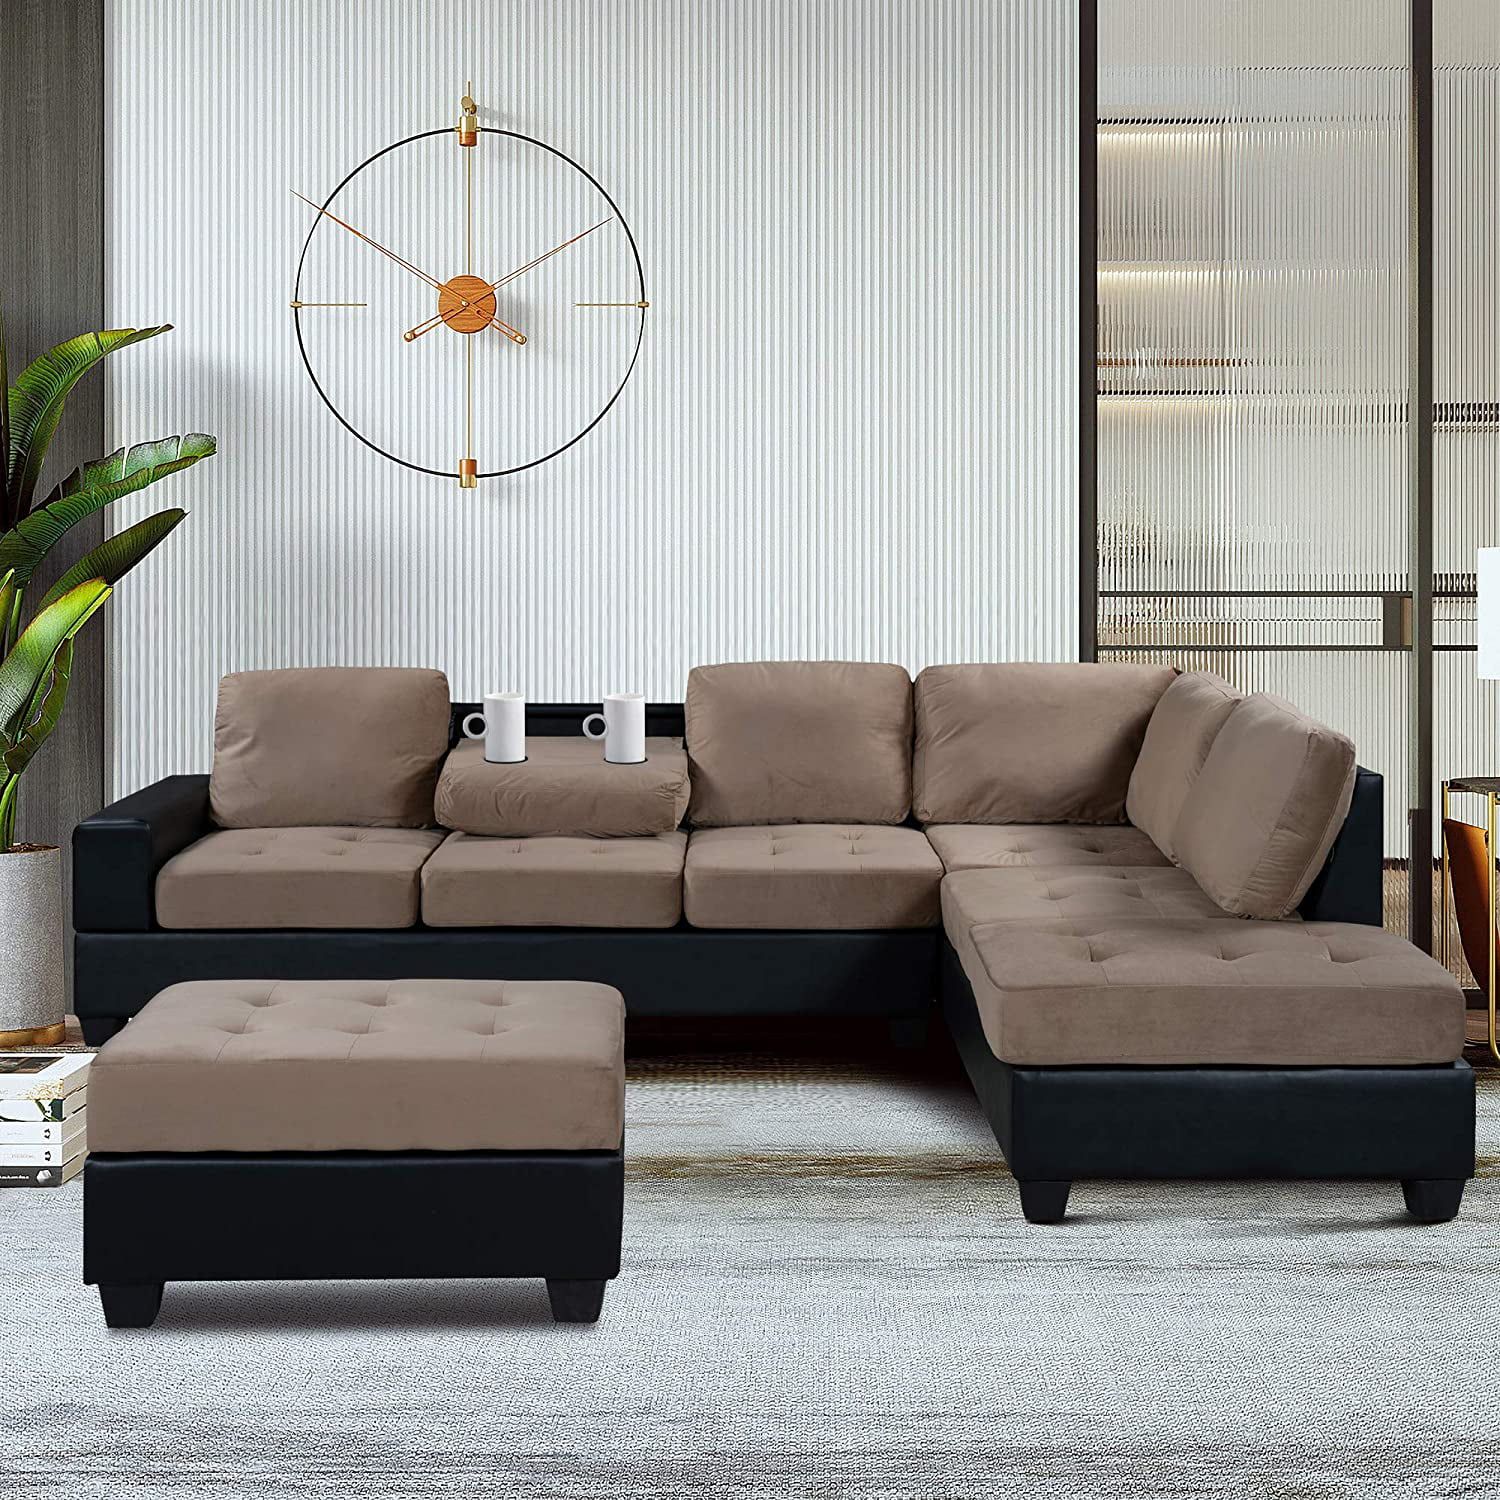 3 Piece Convertible Sectional Sofa L Shaped Couch With Reversible For L Shape Couches With Reversible Chaises (View 7 of 20)